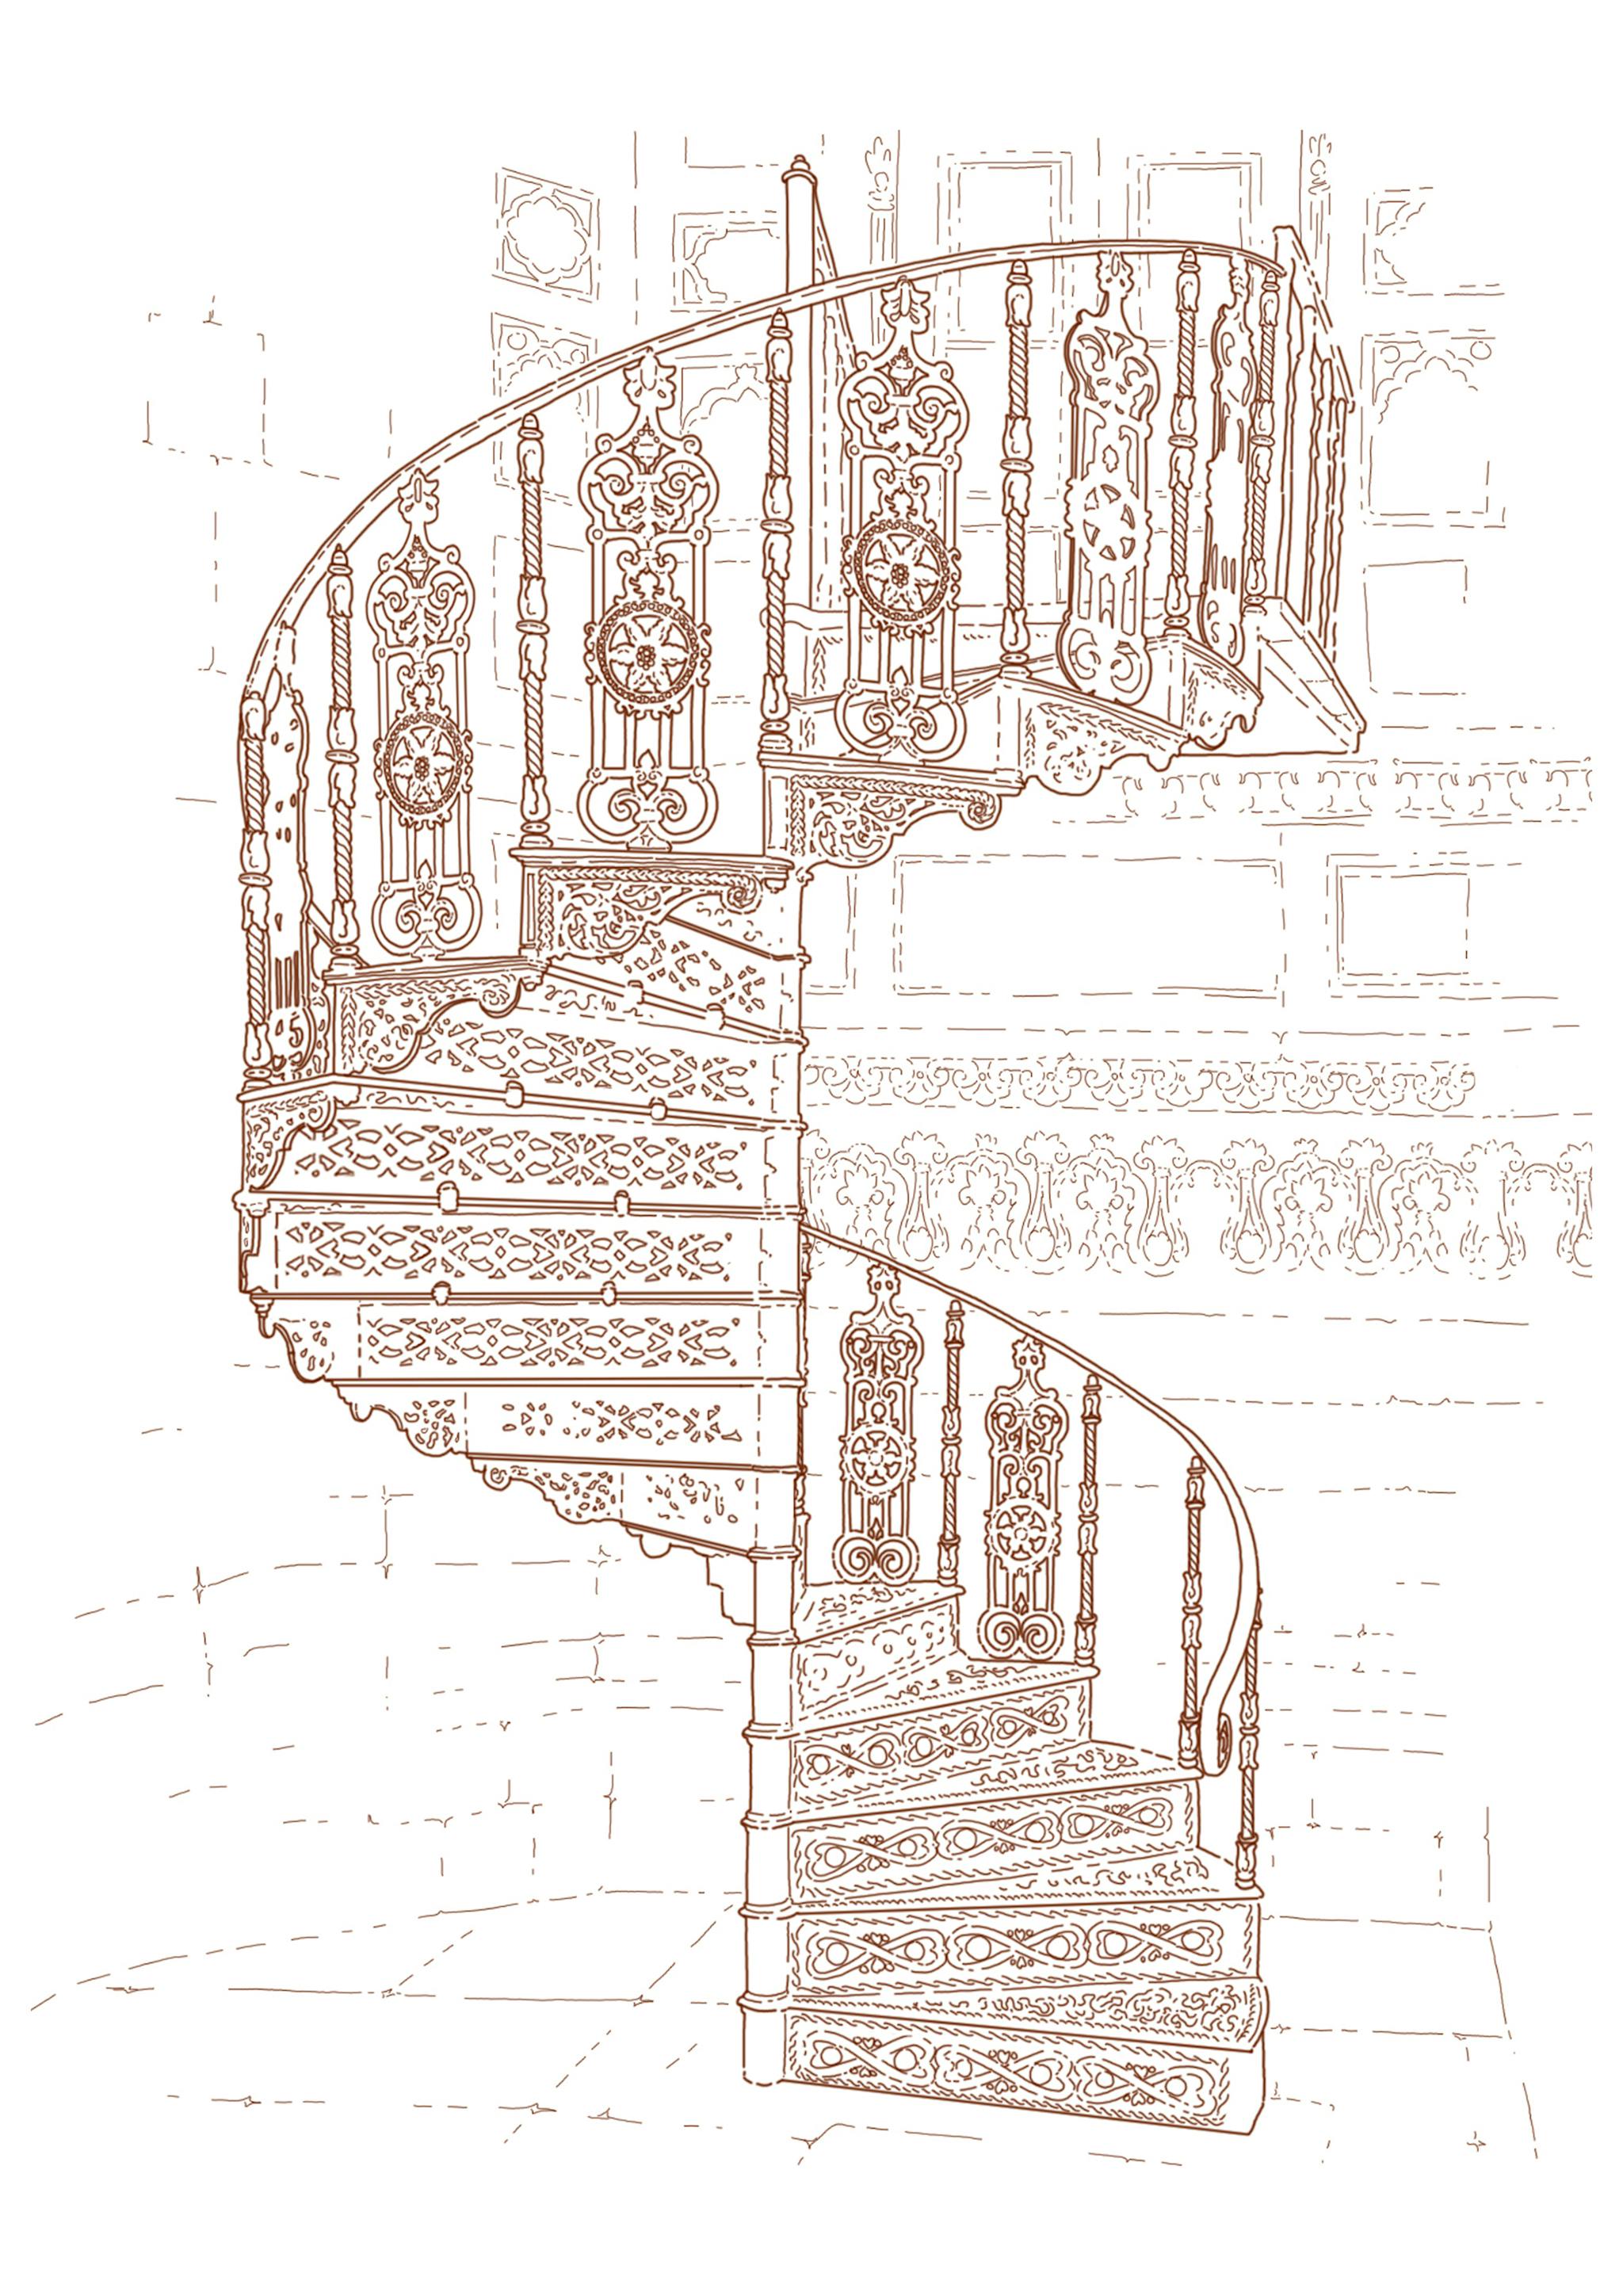 highly ornamented spiral staircase illustrated in red on white